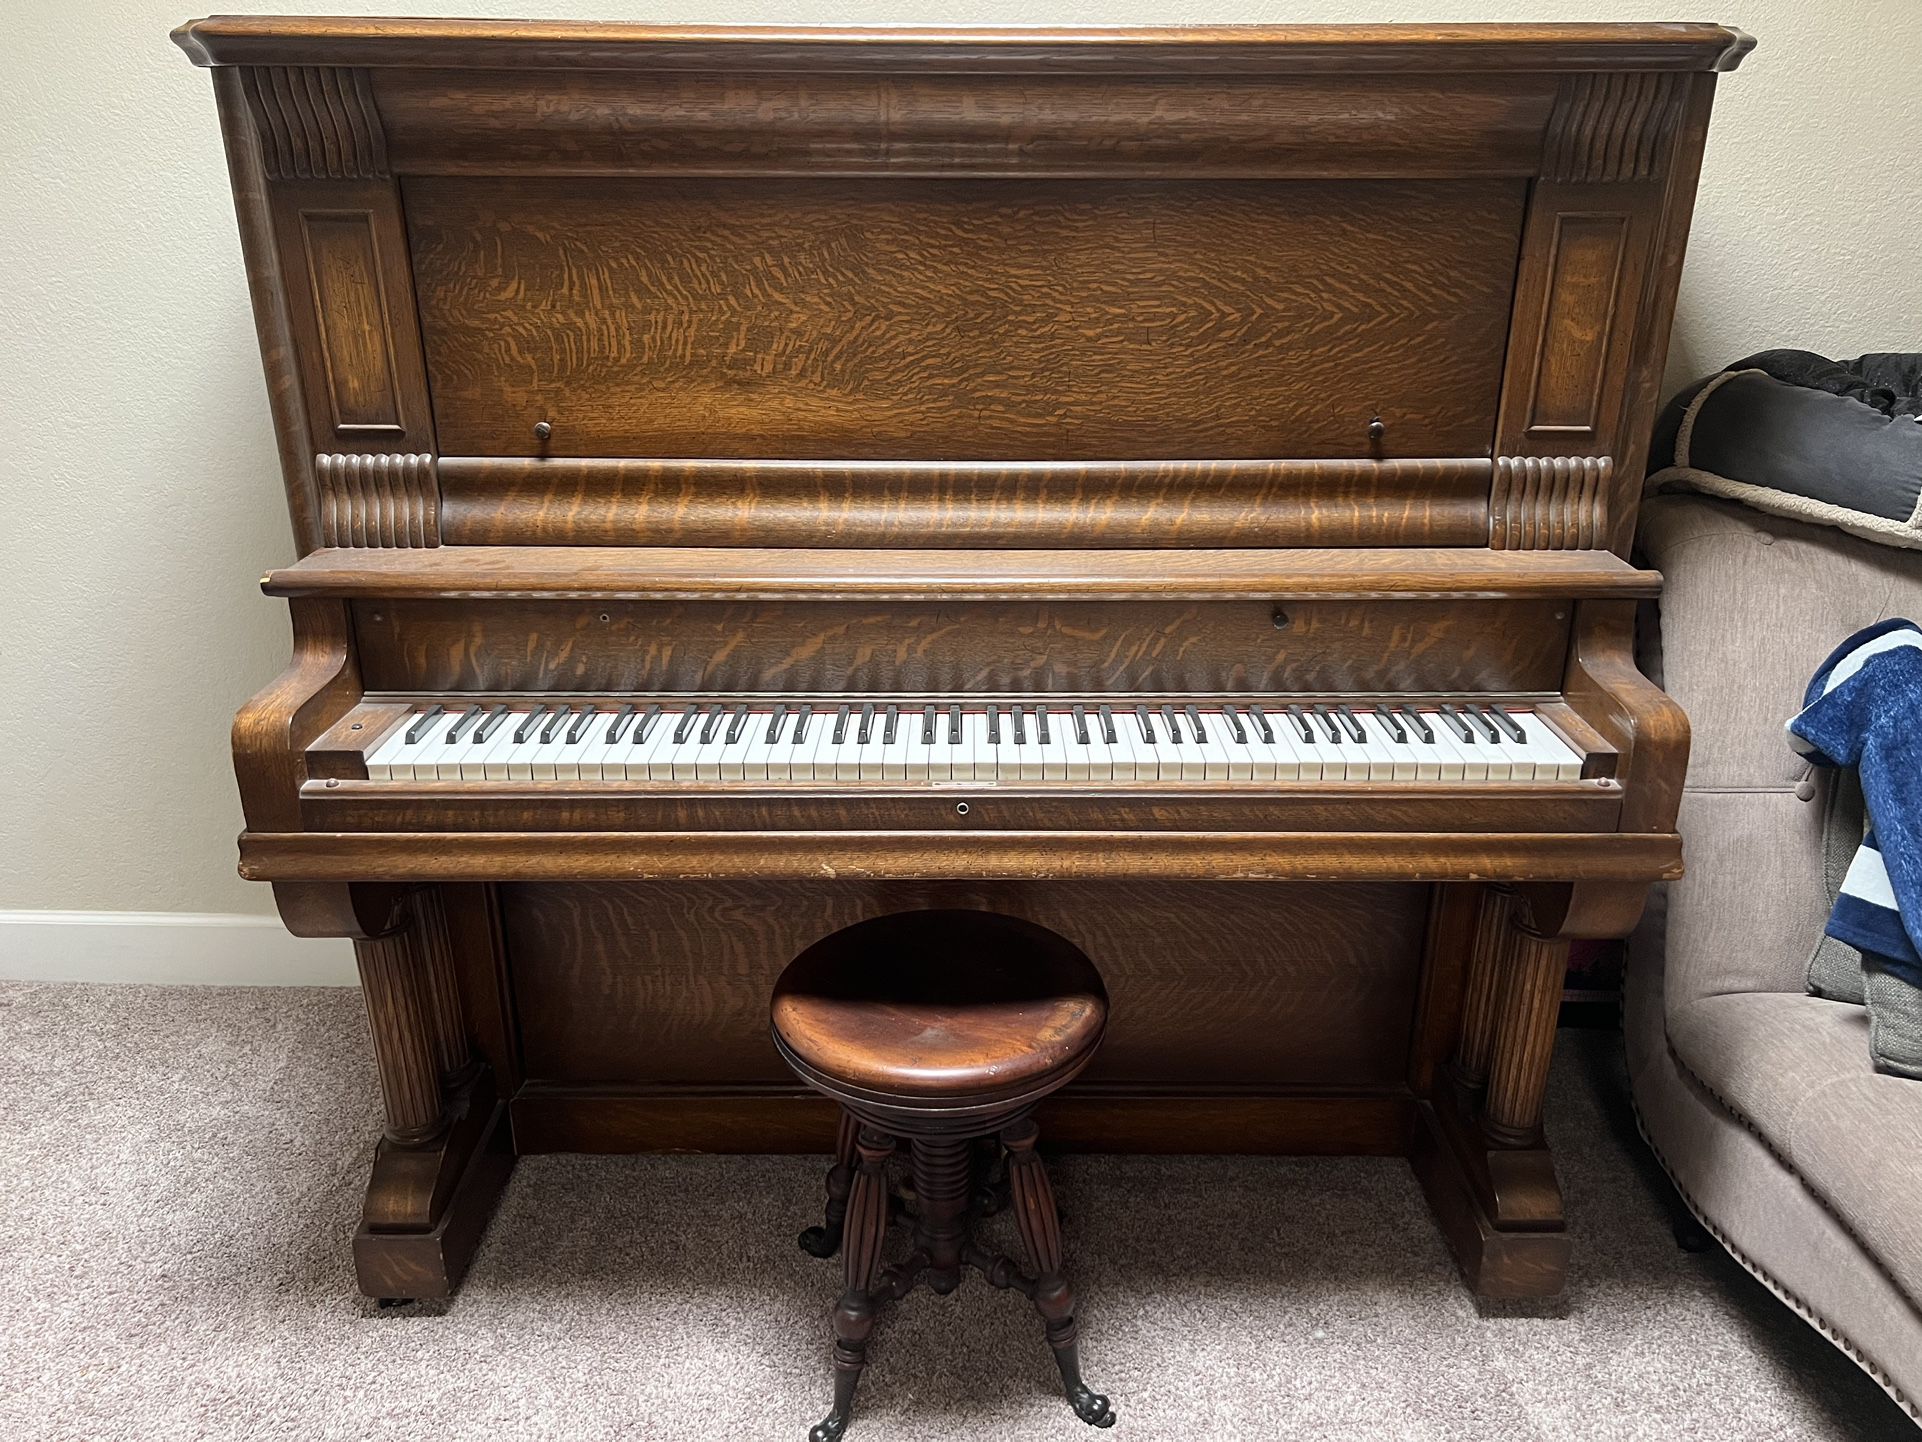 Upright Piano And Chair For Sale